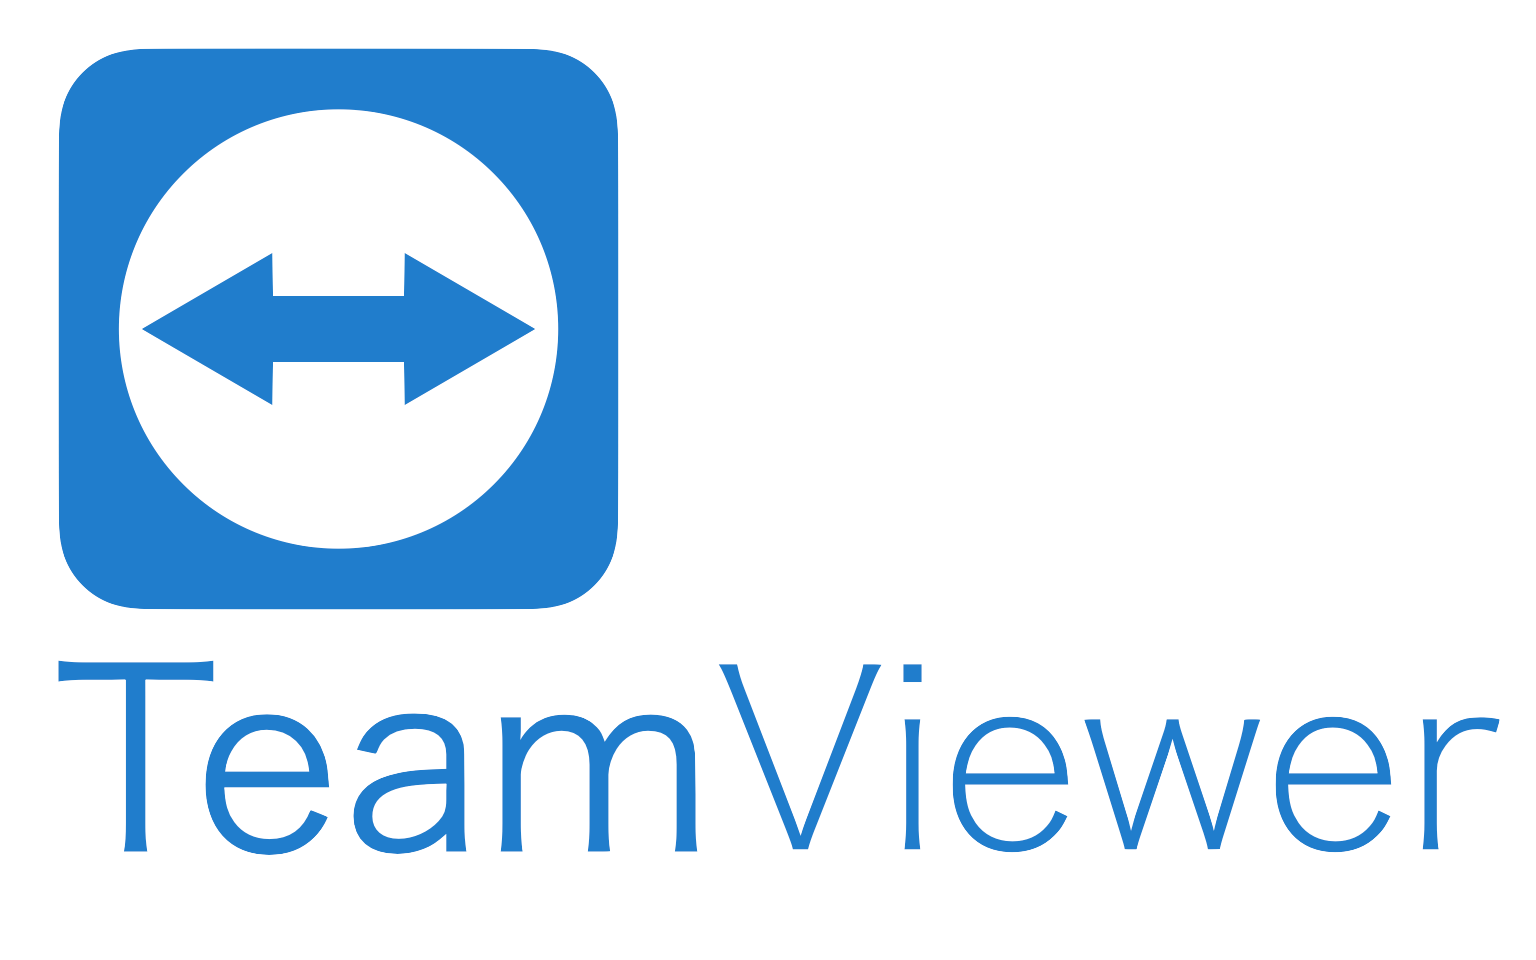 teamviewer 12 free download for windows